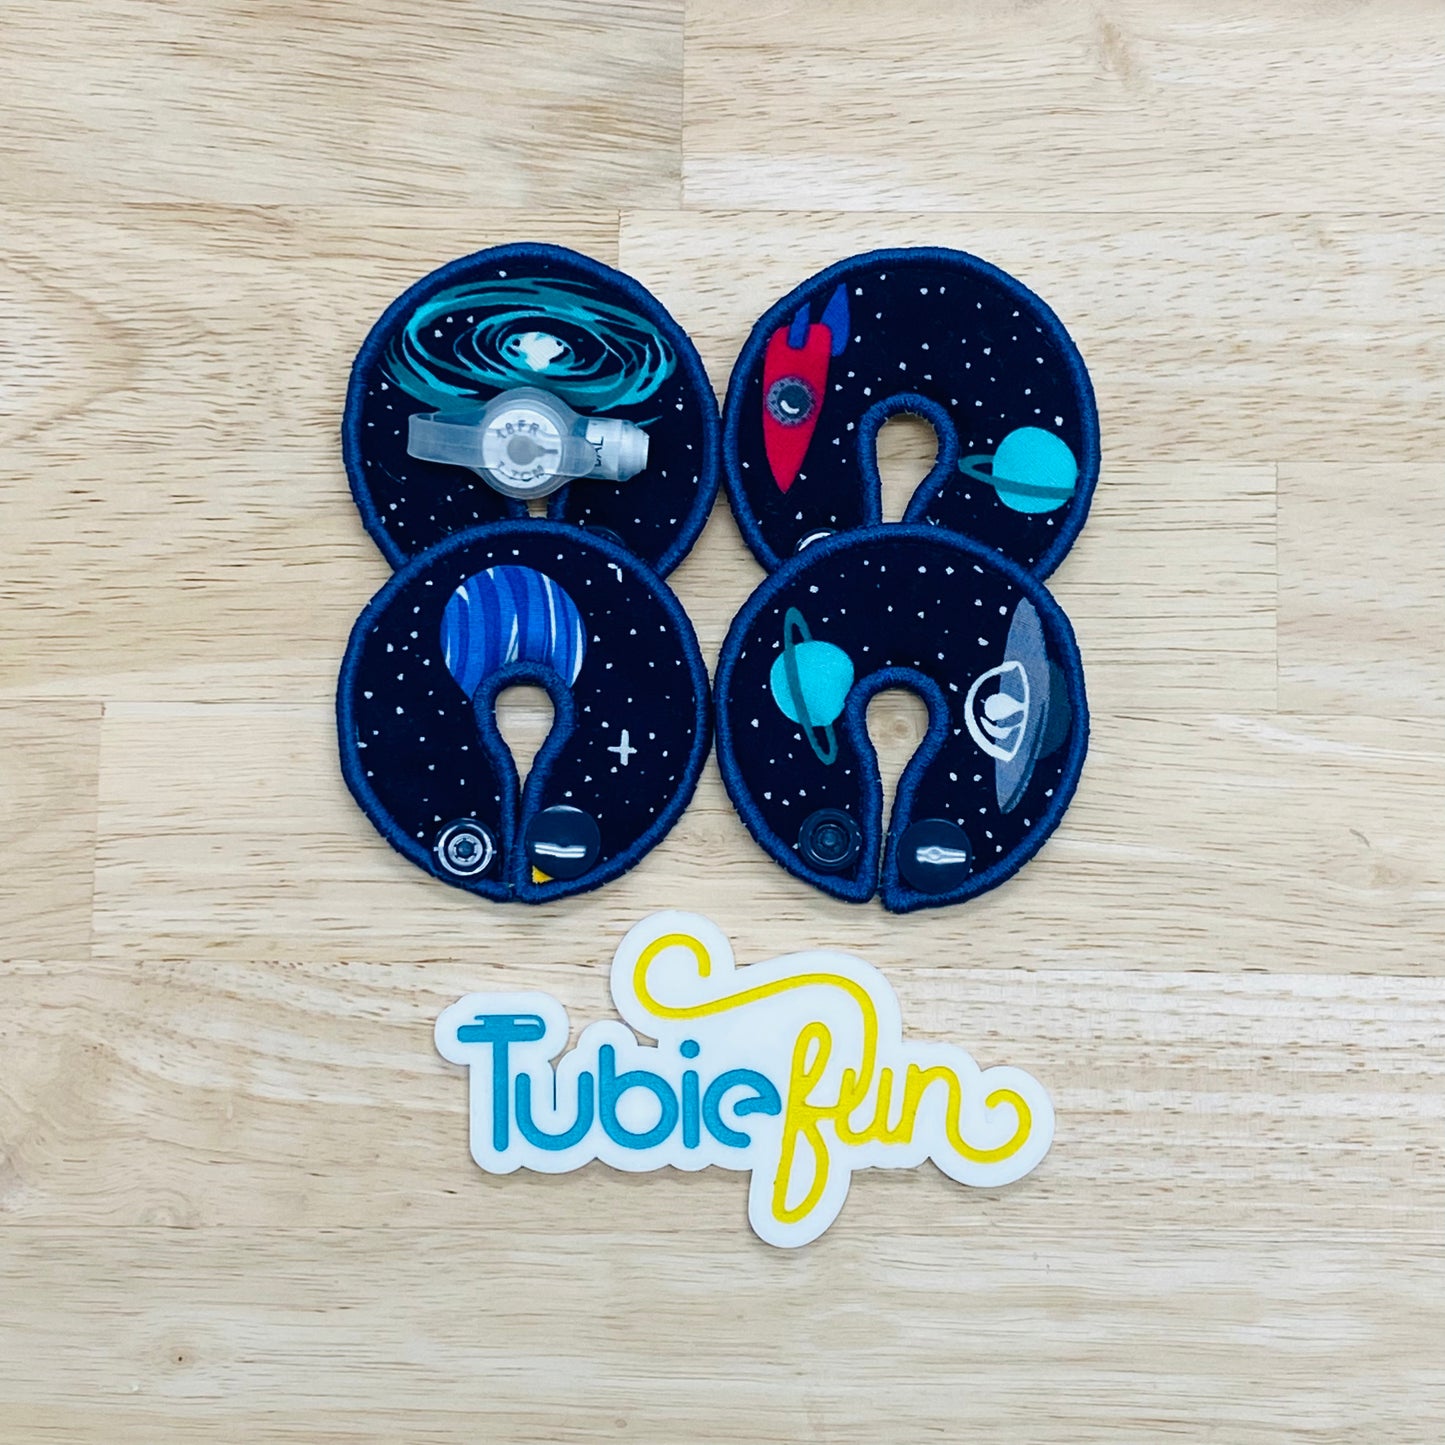 G-Tube Button Pad Cover - Space Objects